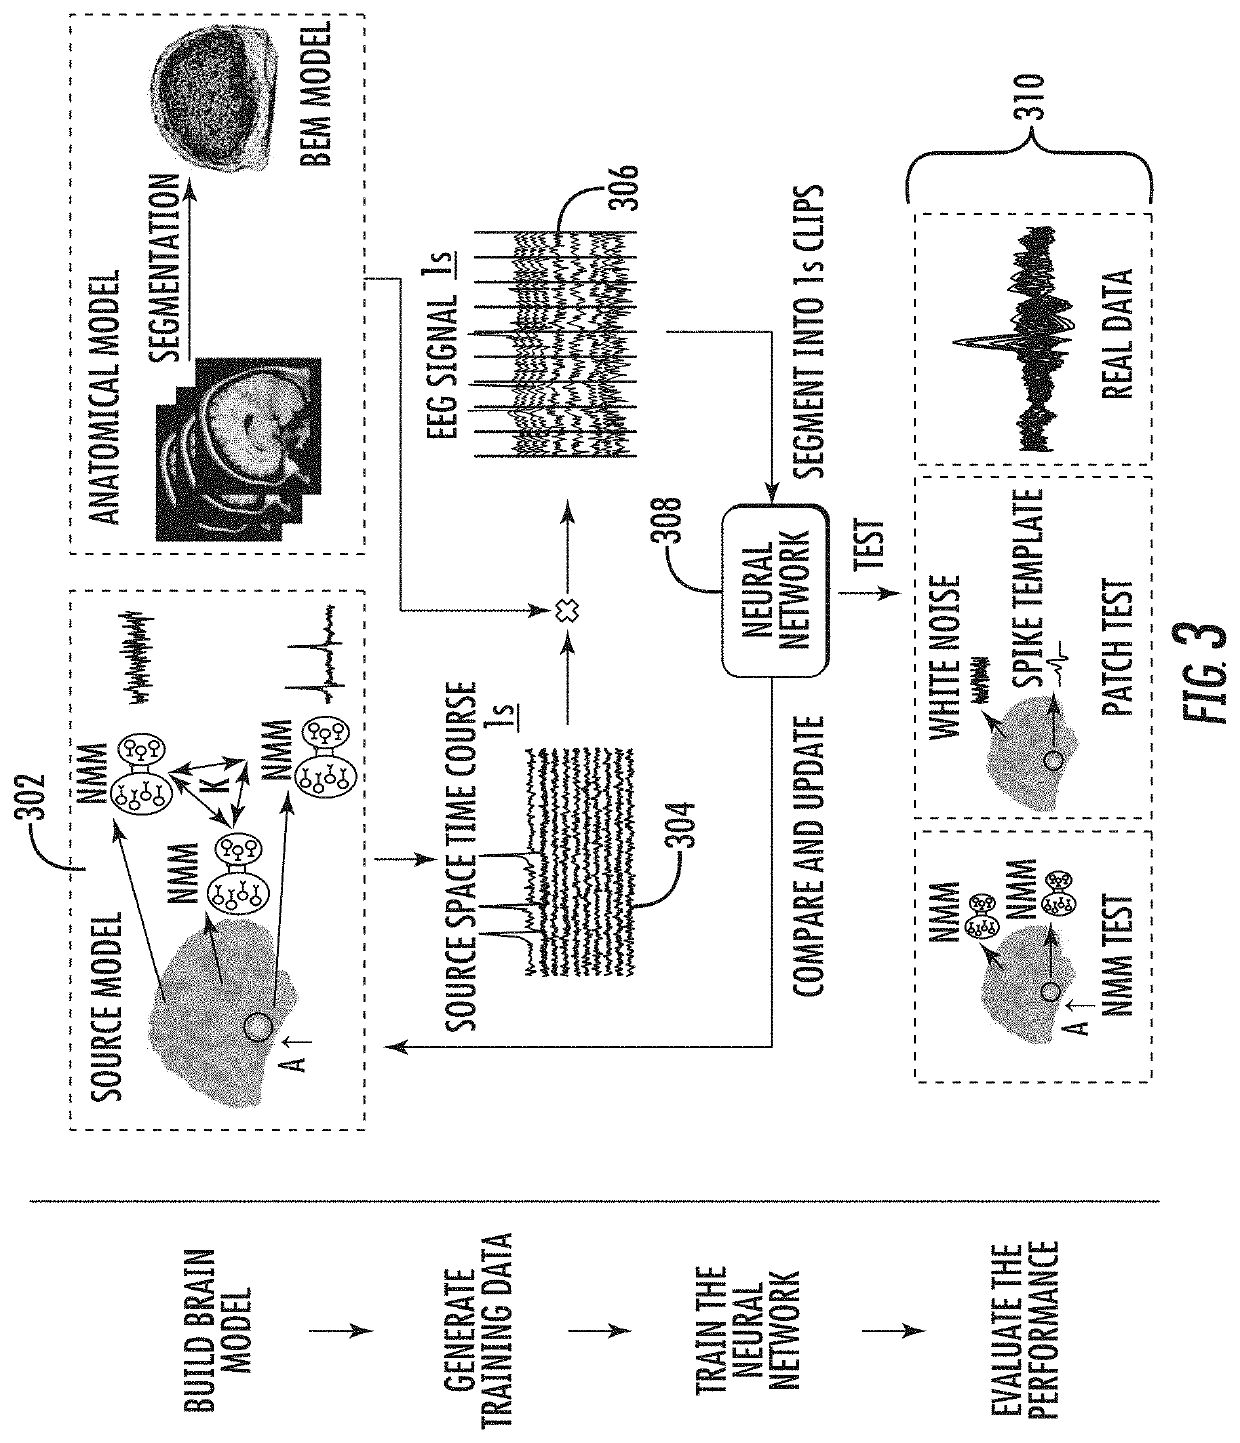 Methods and apparatus for electromagnetic source imaging using deep neural networks